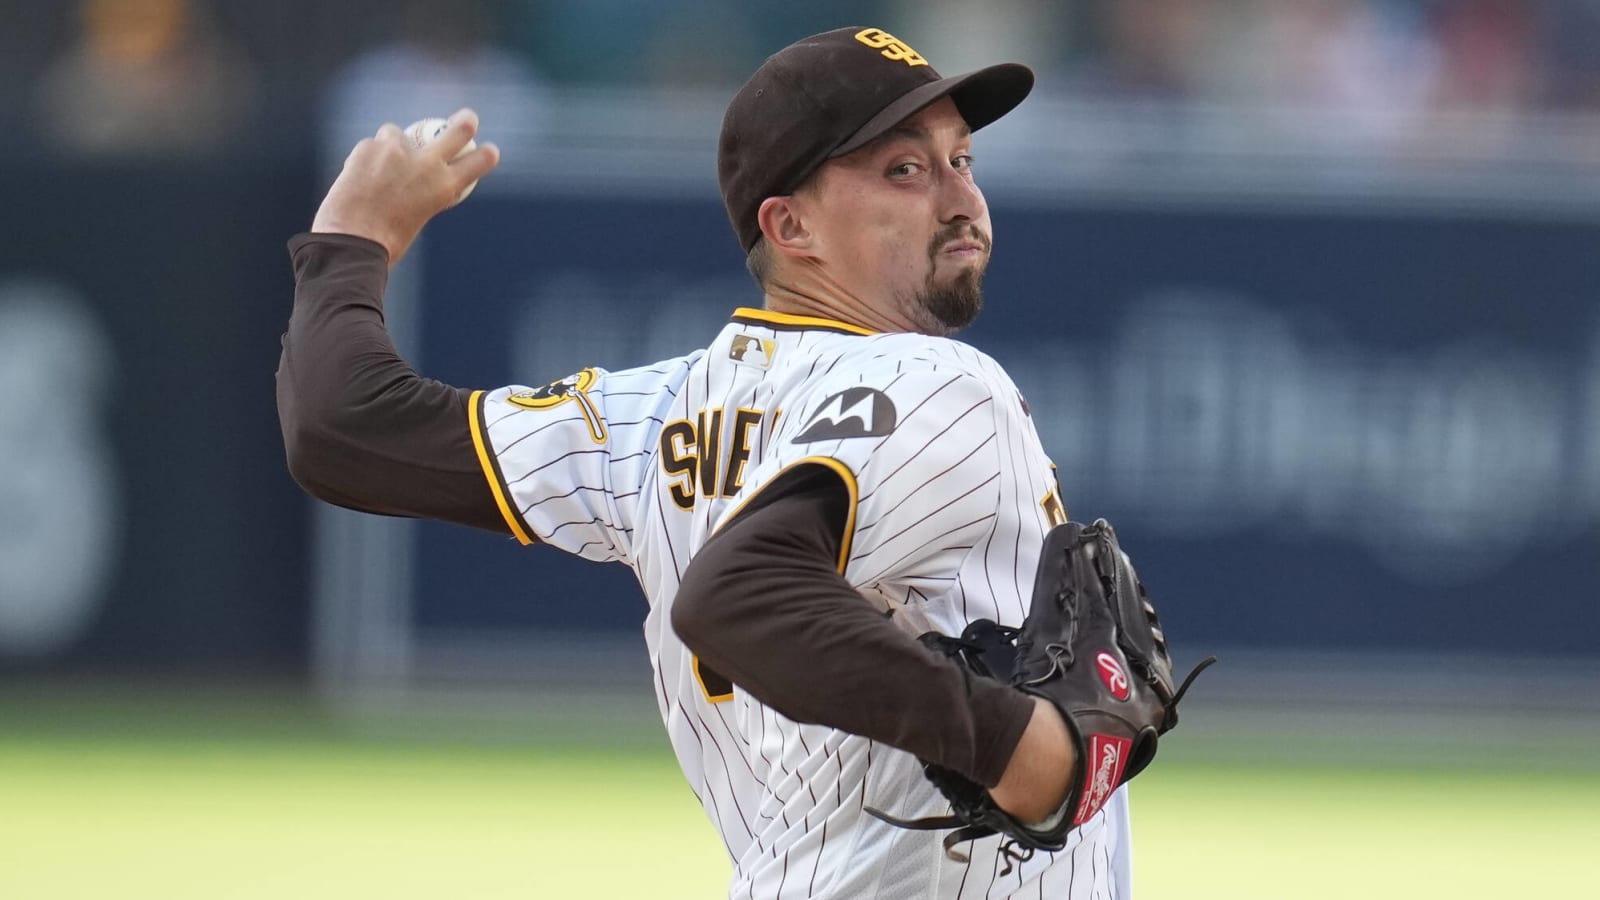 MLB best bets, strikeout props for Wednesday 9/13 Fade Snell and youll do well Yardbarker